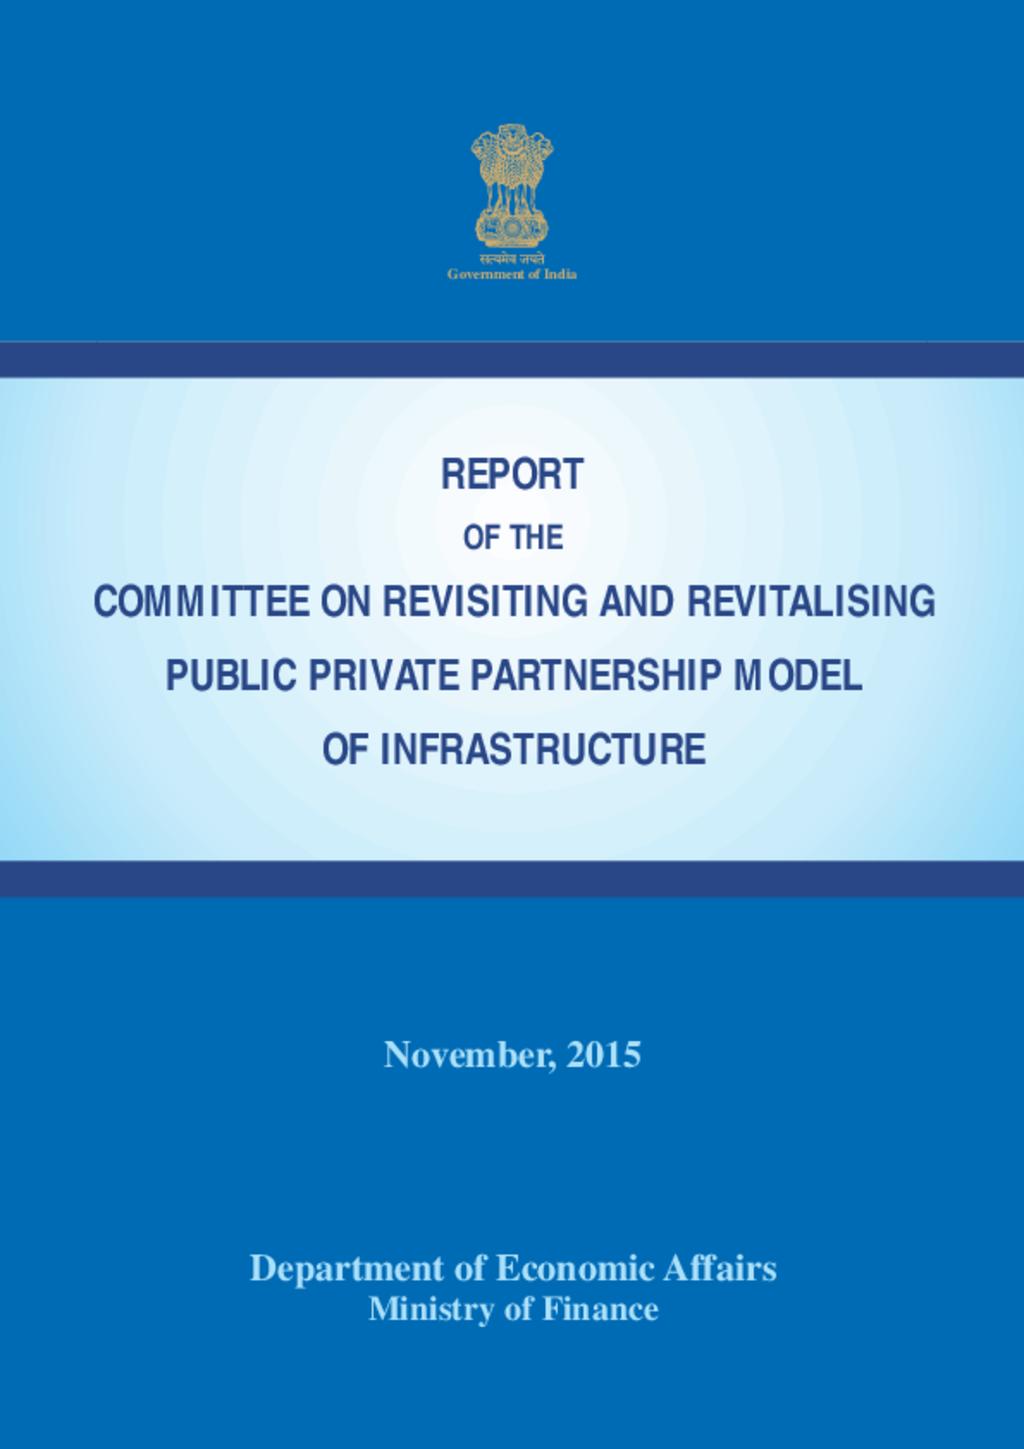 Report of the Committee on Revisiting and Revitalising Public Private Partnership Model of Infrastructure